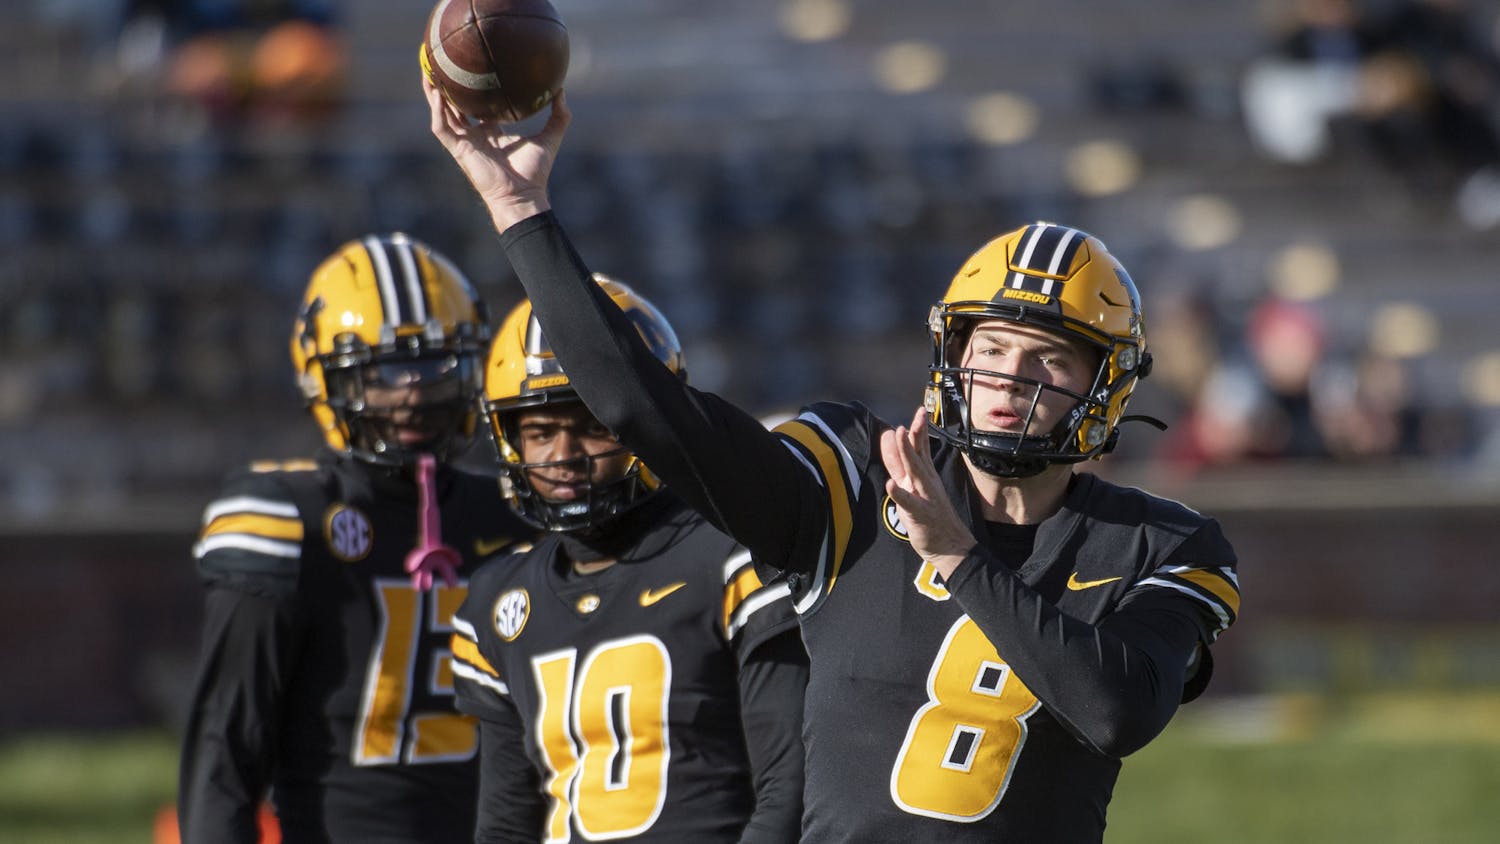 Missouri quarterback Connor Bazelak warms up before an NCAA college football game against South Carolina Saturday, Nov. 13, 2021, in Columbia, Mo. (AP Photo/L.G. Patterson)